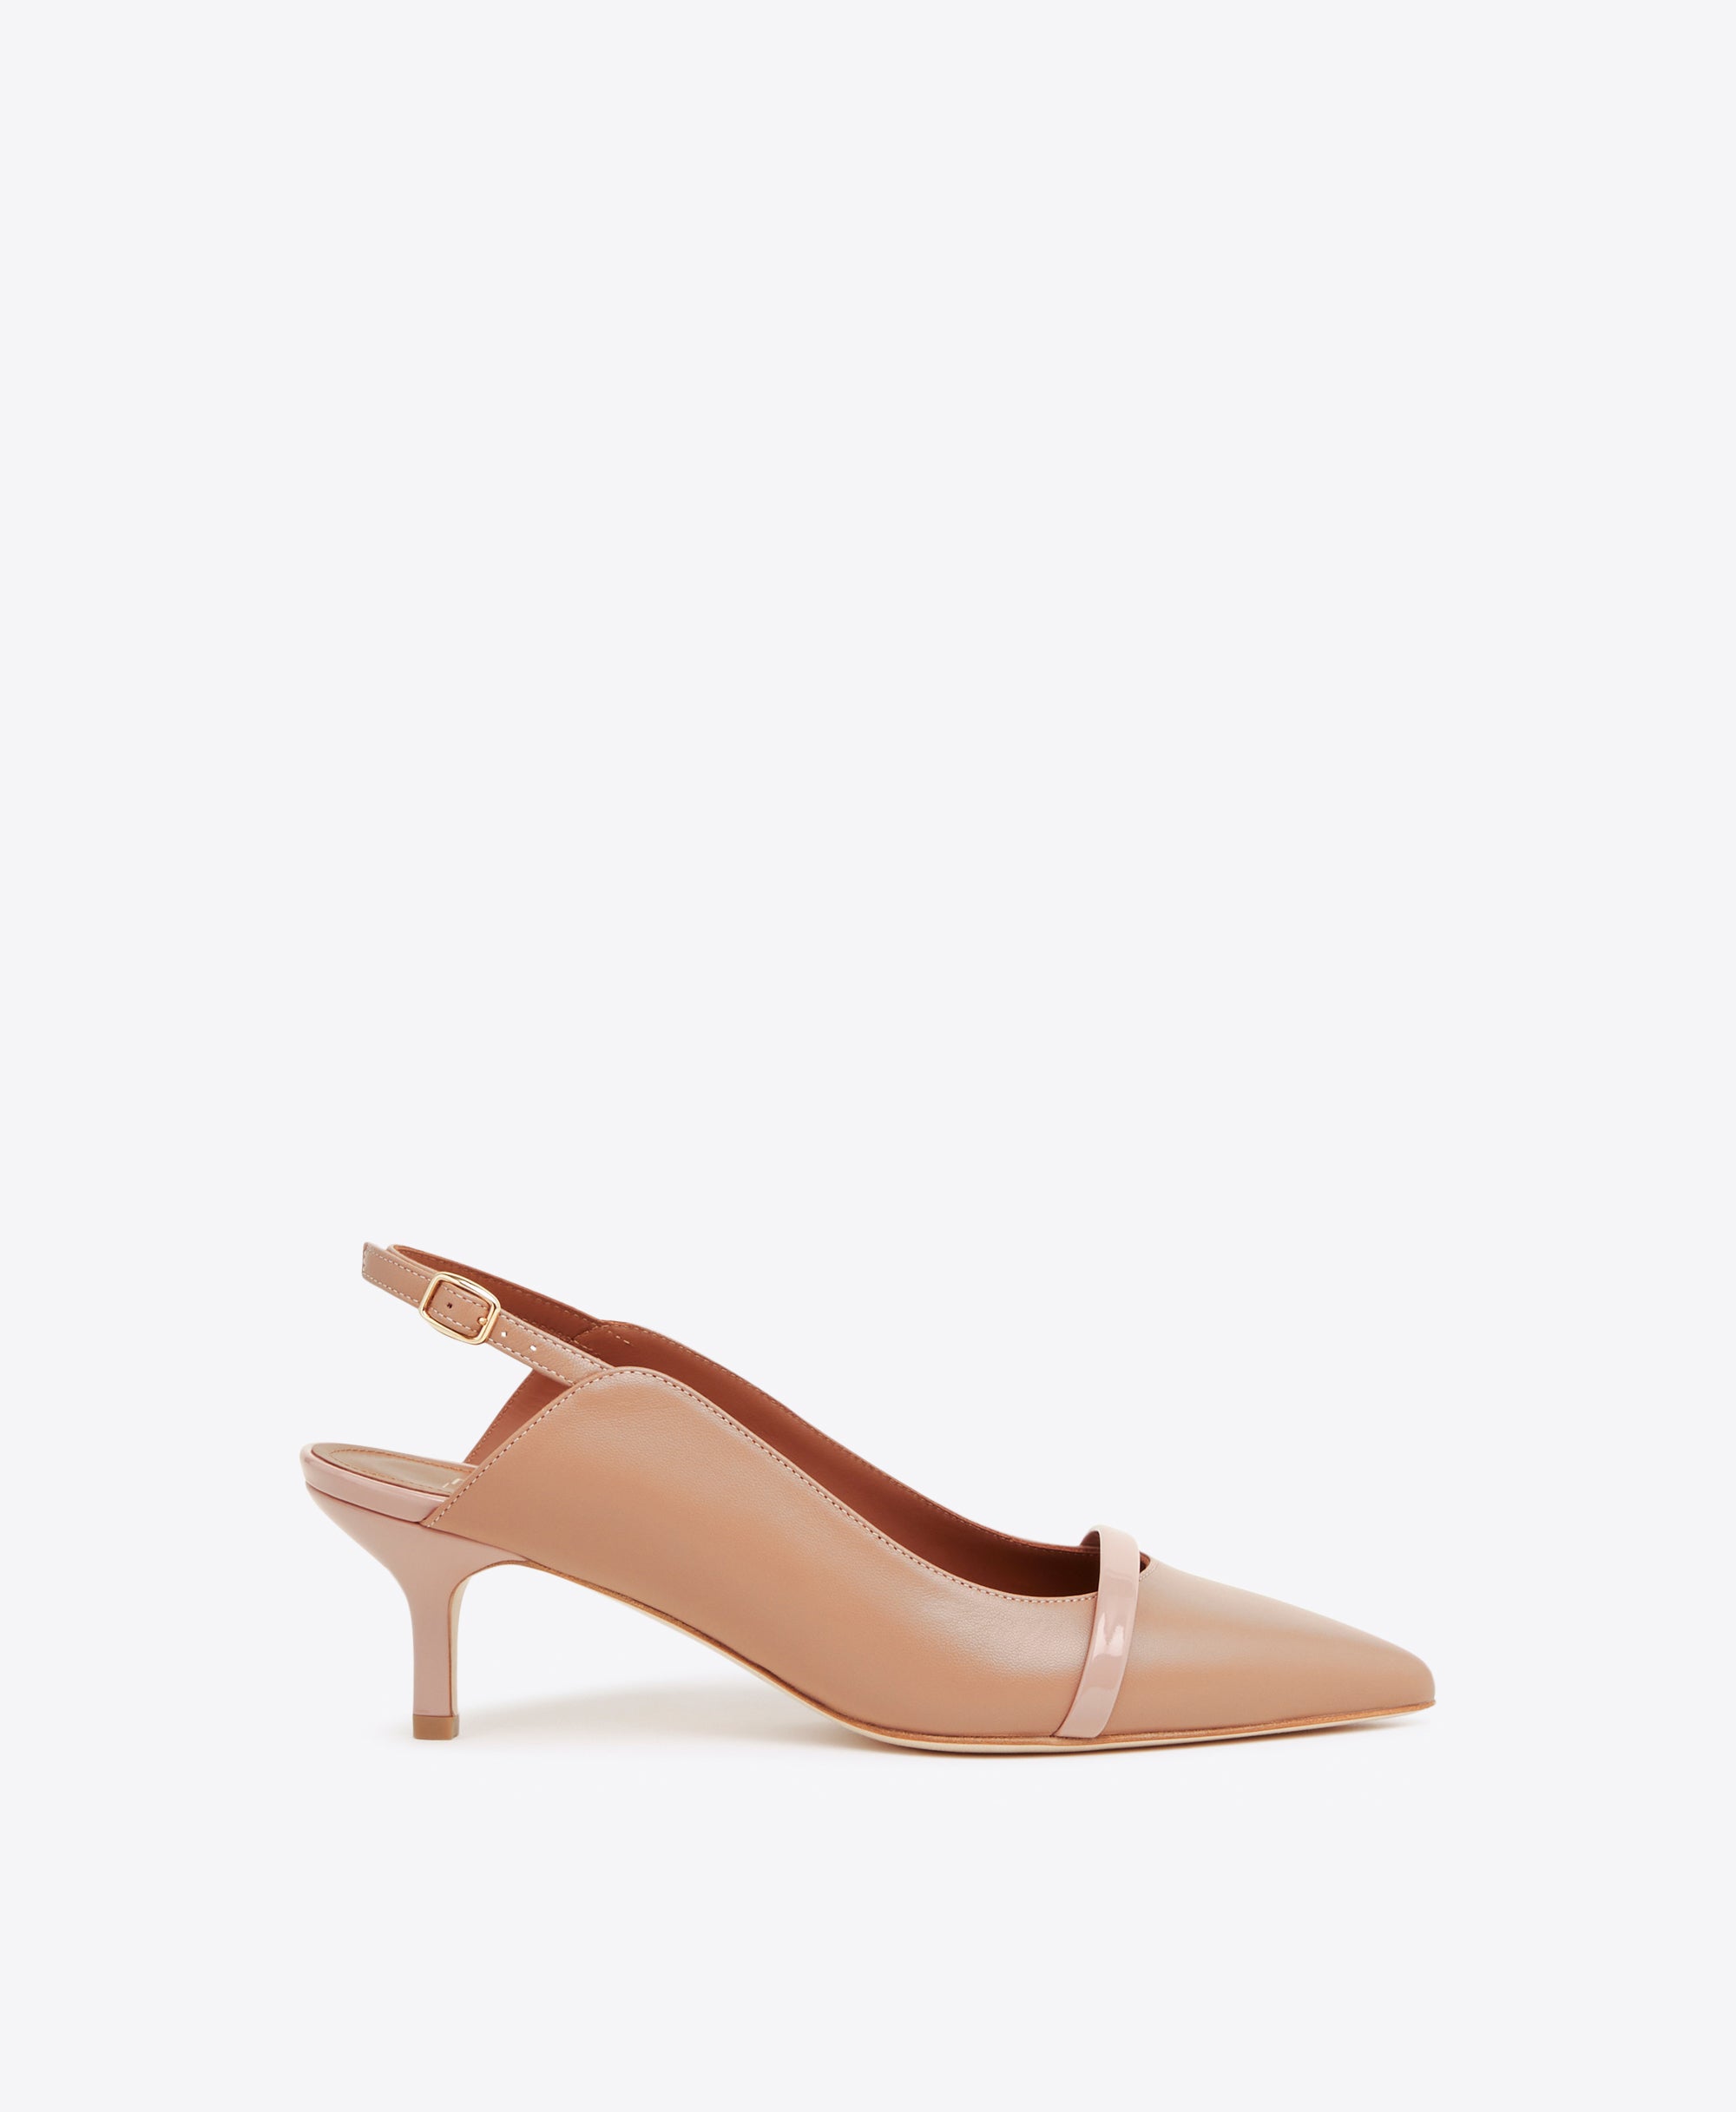 Women's Nude Patent And Blush Pink Leather Pointed Toe Pumps with Kitten Heel Malone Souliers